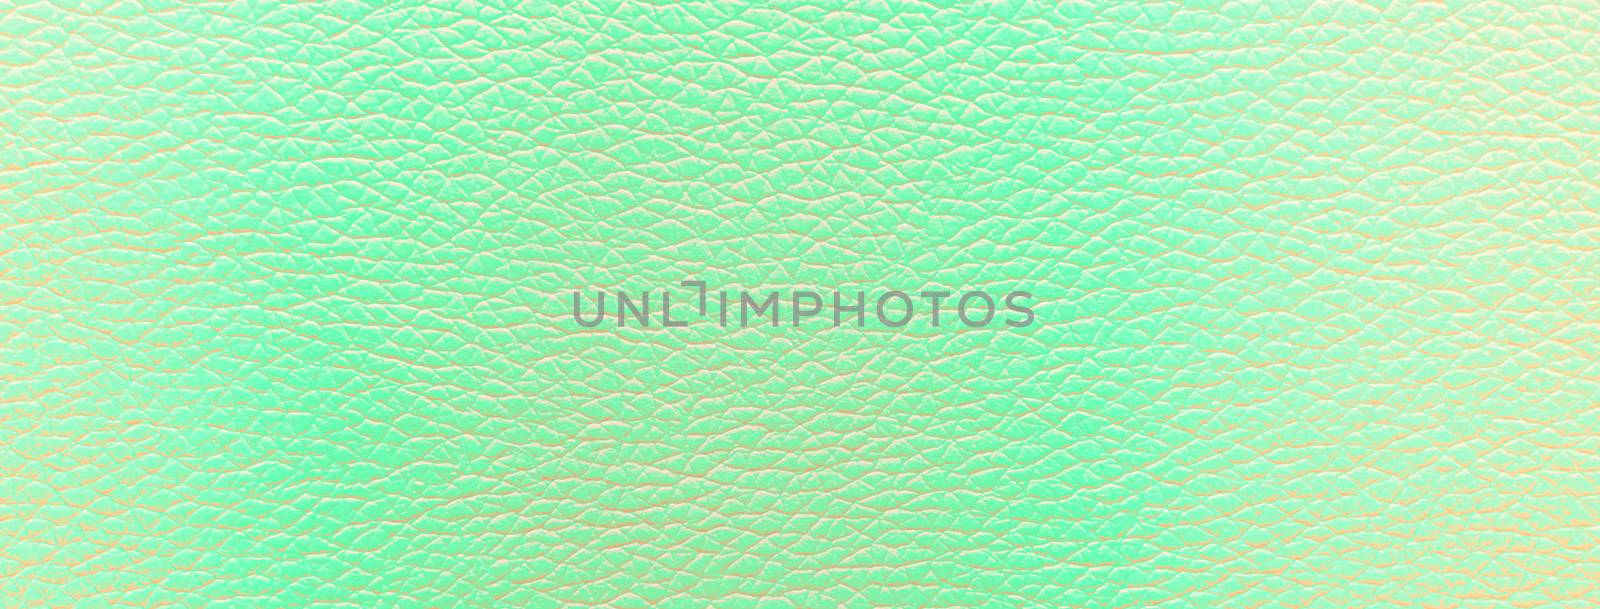 Leather green texture for background by marcorubino